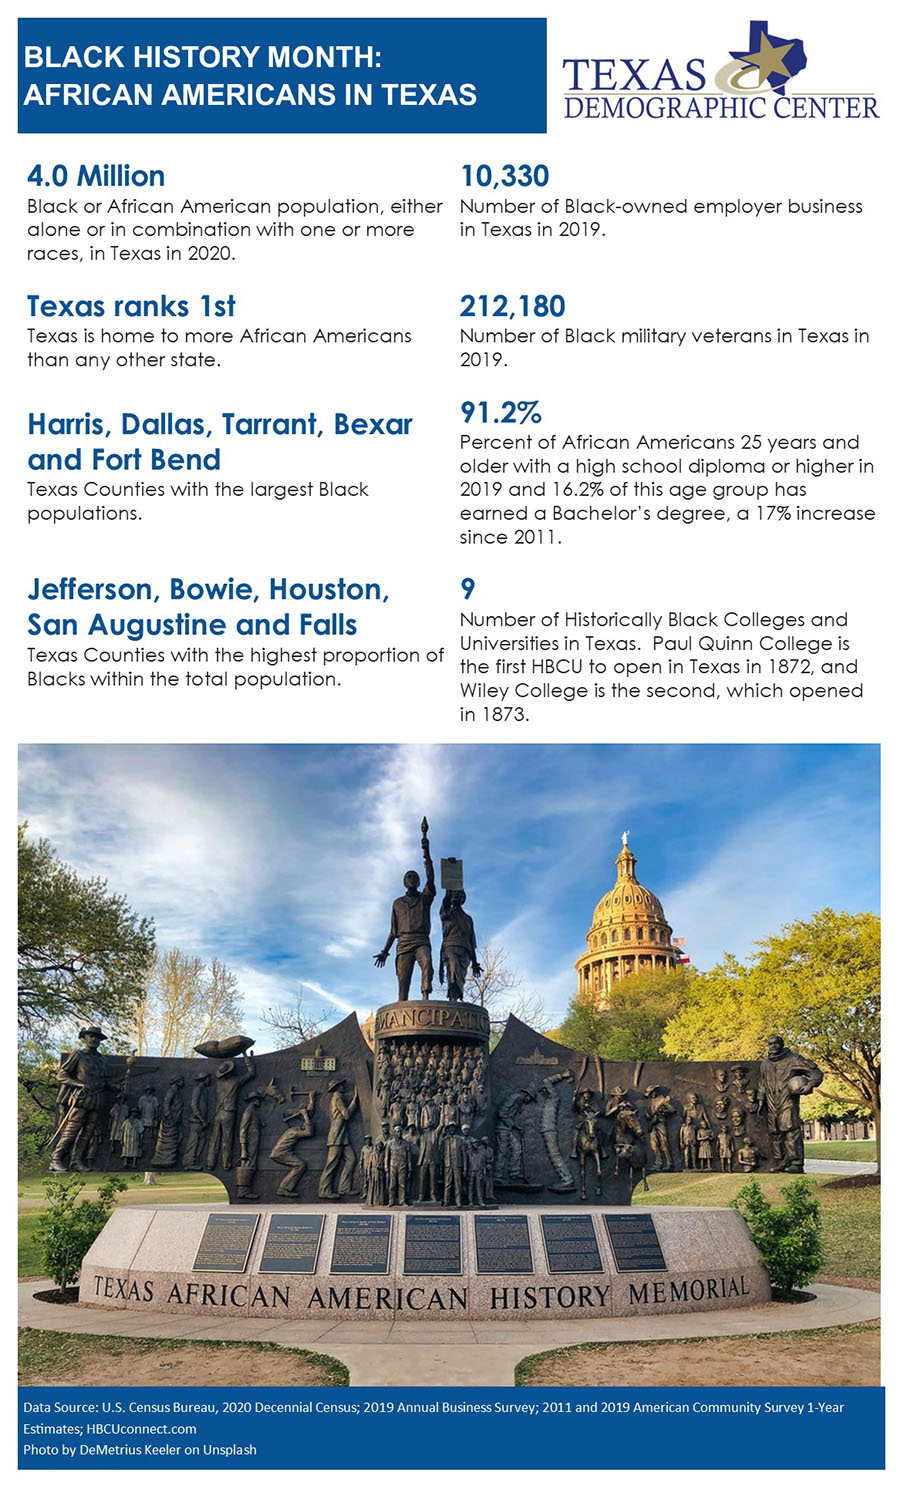 One Page Inforgraphic the Black History Month: African Americans in Texas